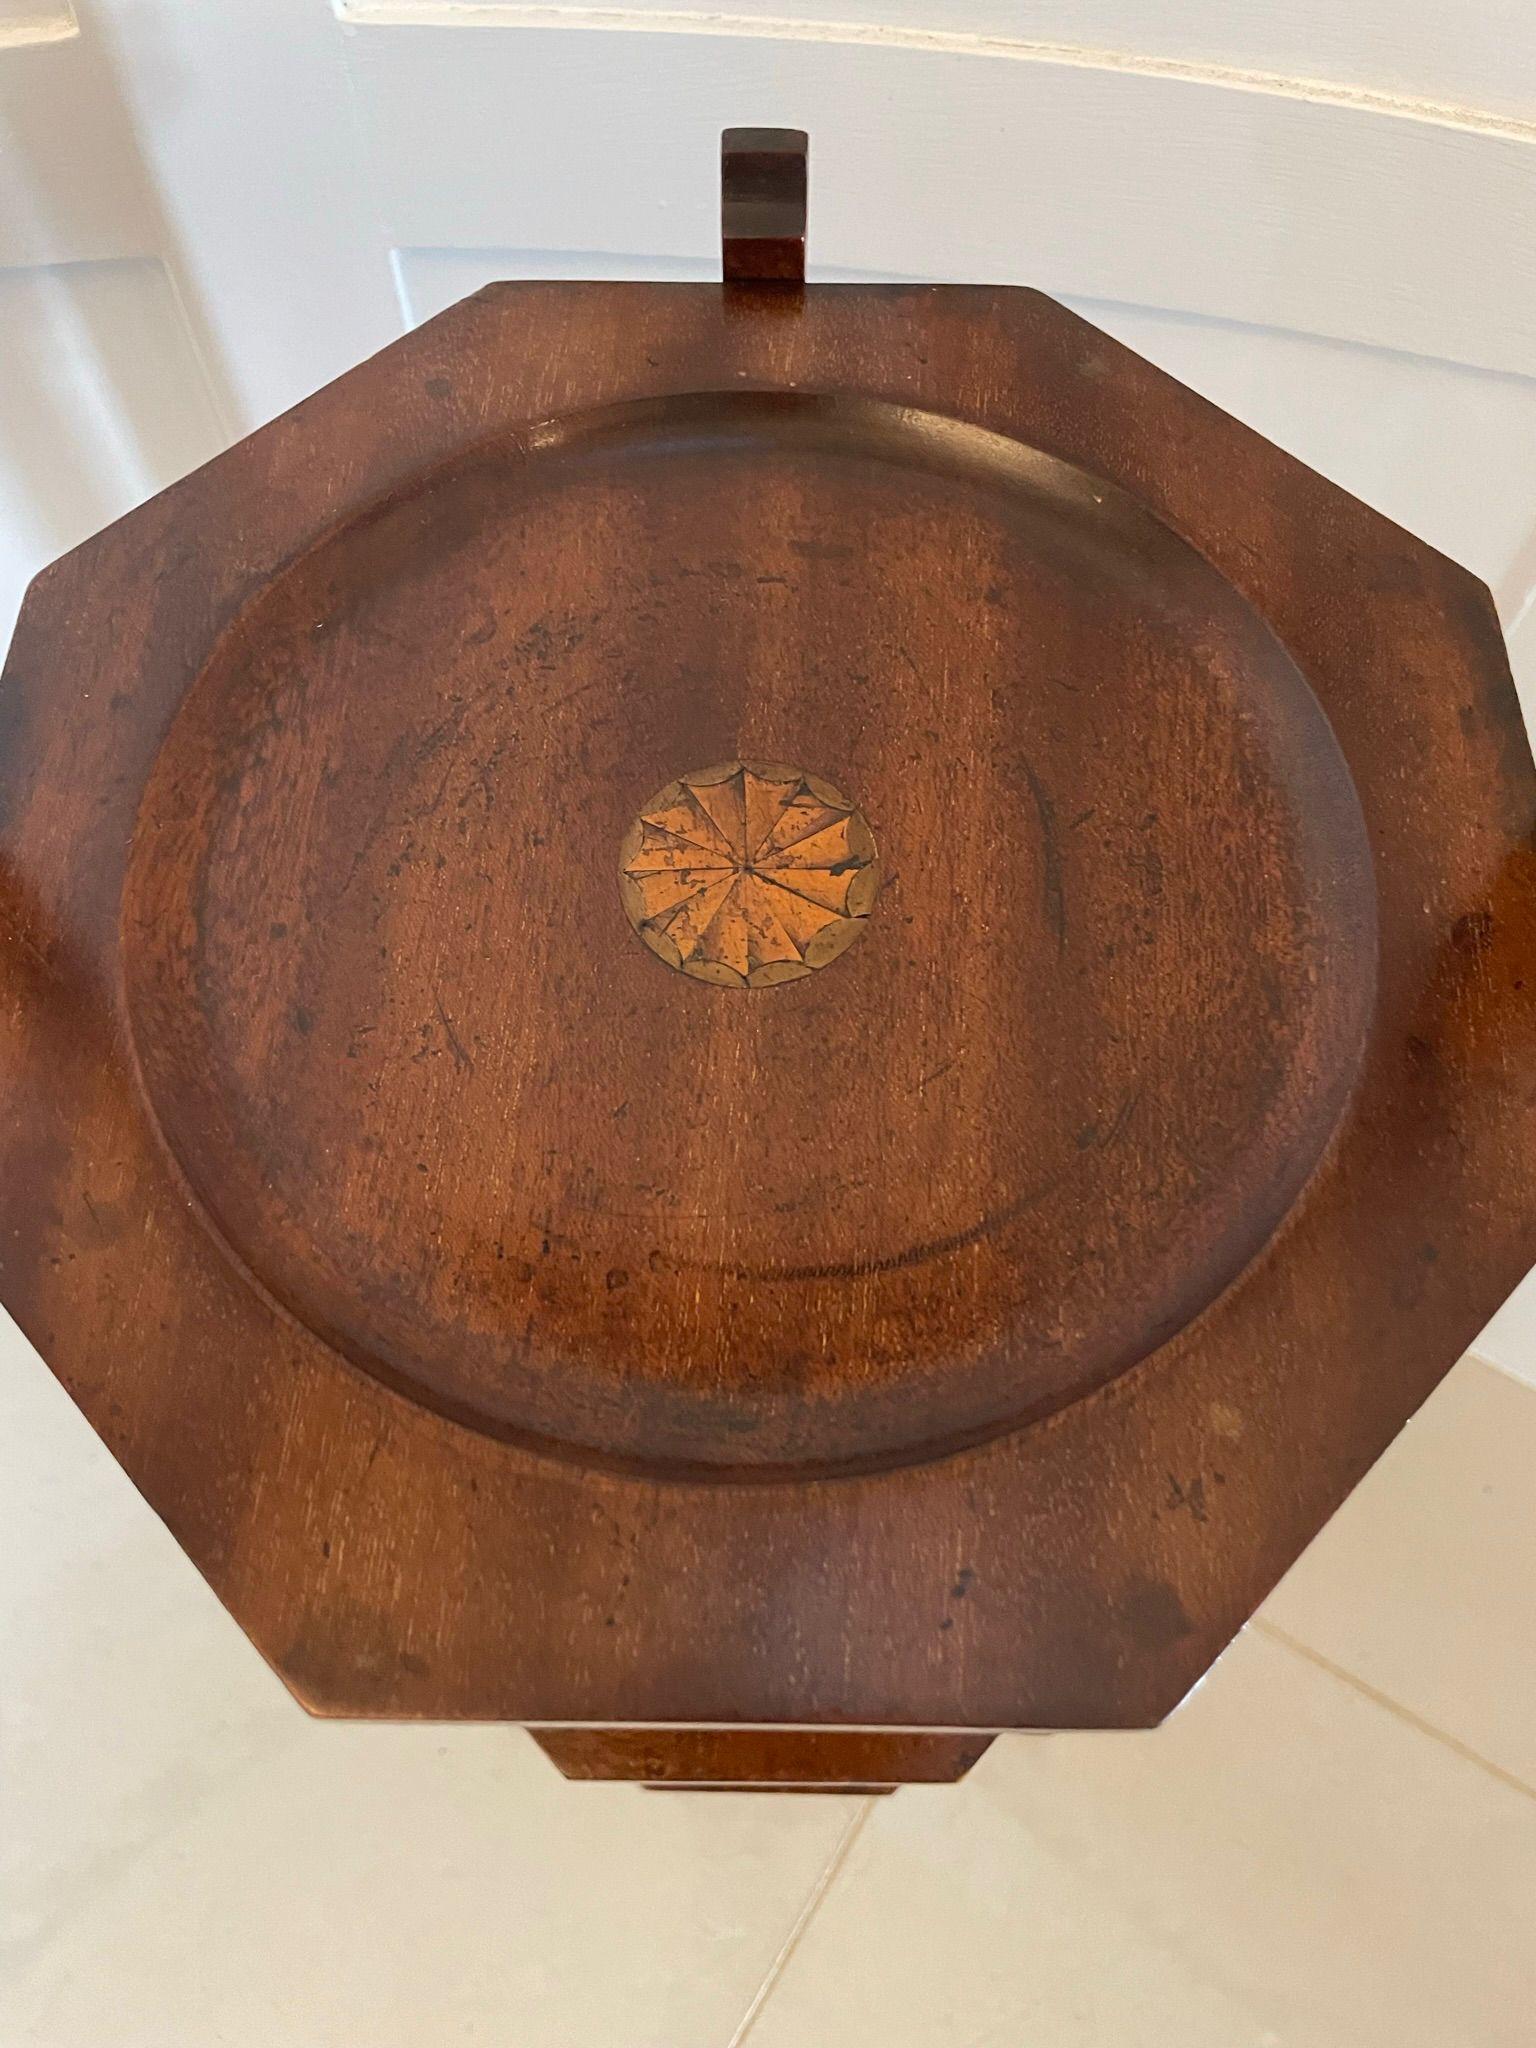 Antique Edwardian inlaid mahogany 3 tier cake stand having a shaped top and 3 shaped tiers with very attractive inlaid shells. It stands on elegantly shaped mahogany legs.

Dimensions:
Height : 84 cm (33.07 in)
Width : 23 cm (9.05 in)
Depth :